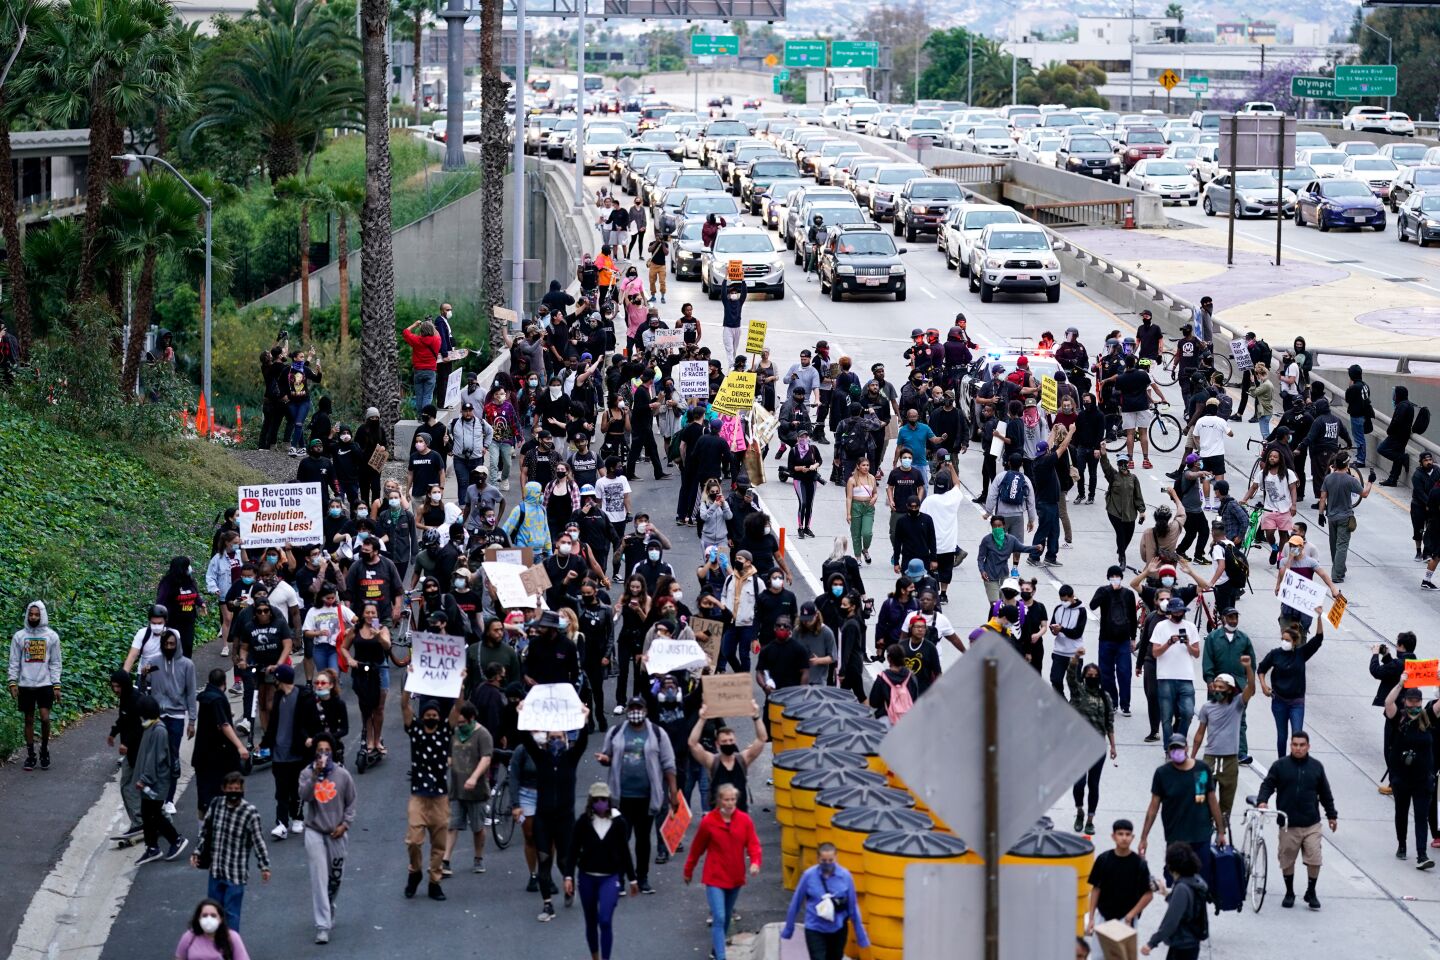 Protesters take to the streets Friday in downtown L.A.